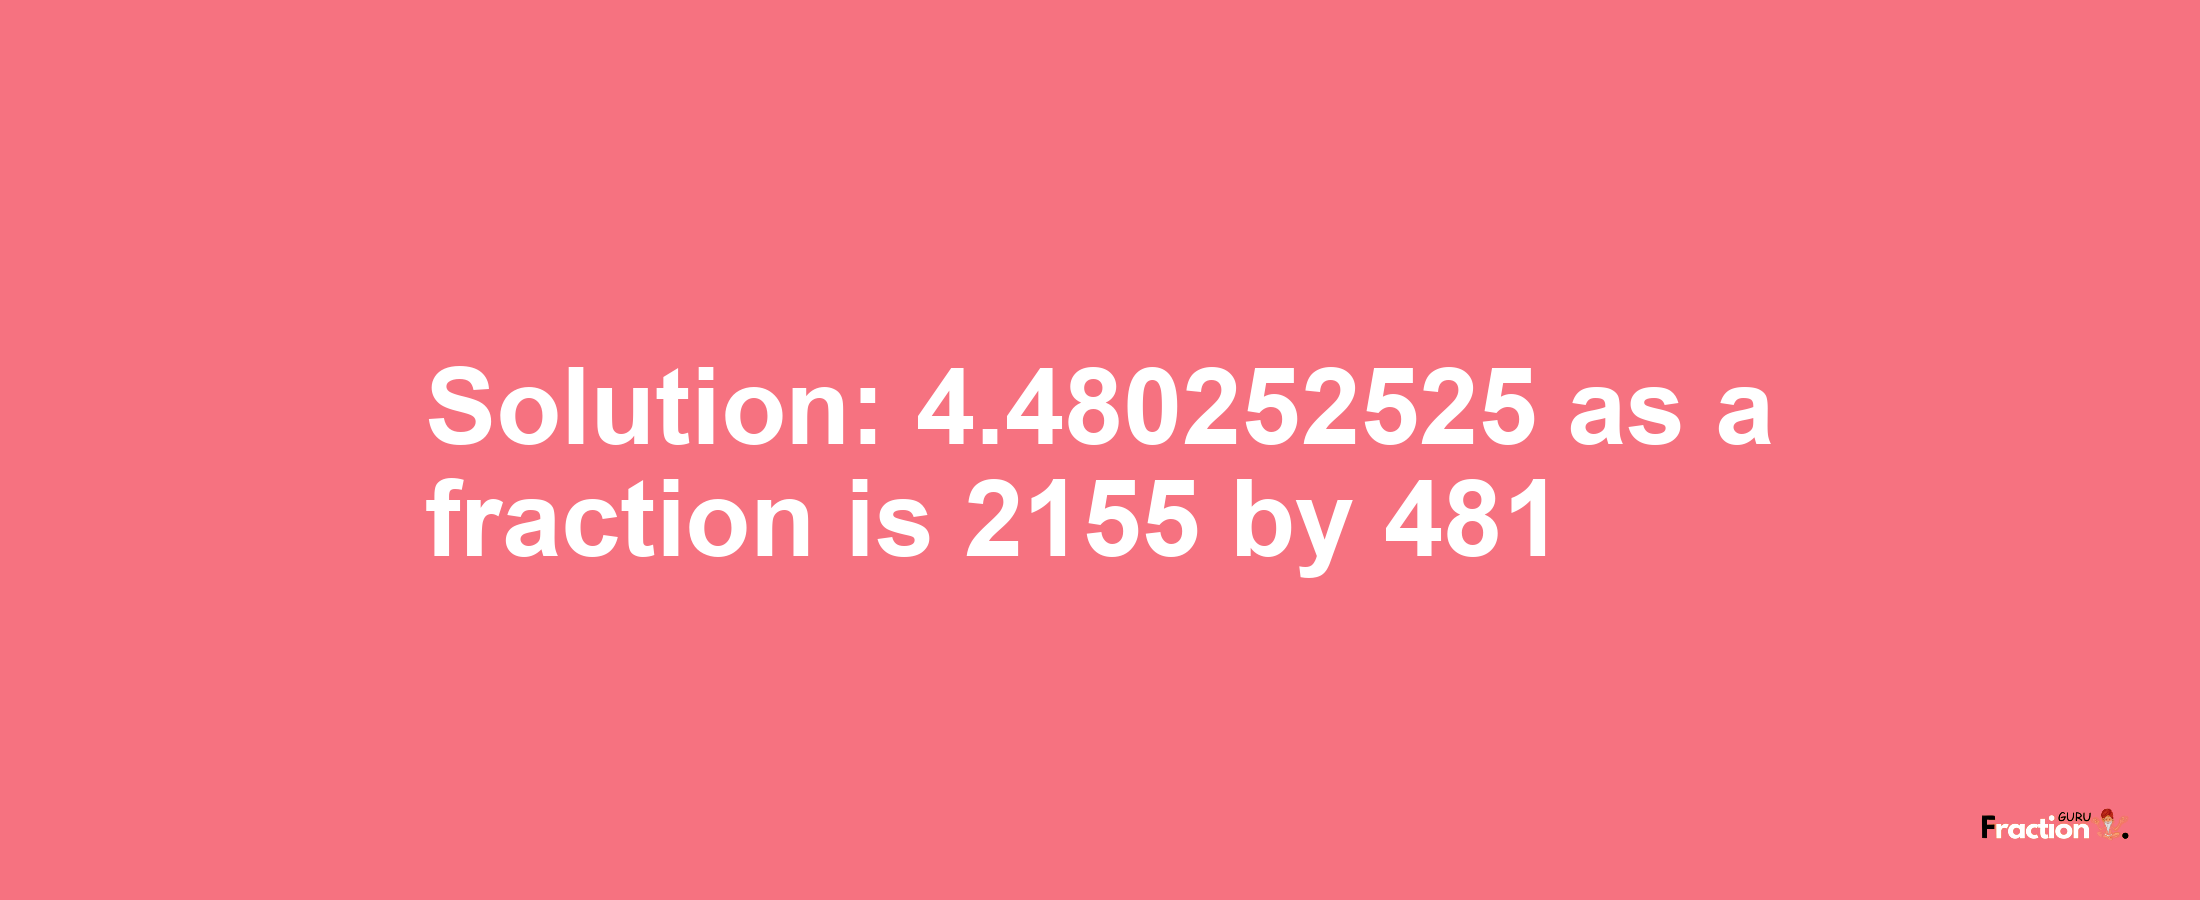 Solution:4.480252525 as a fraction is 2155/481